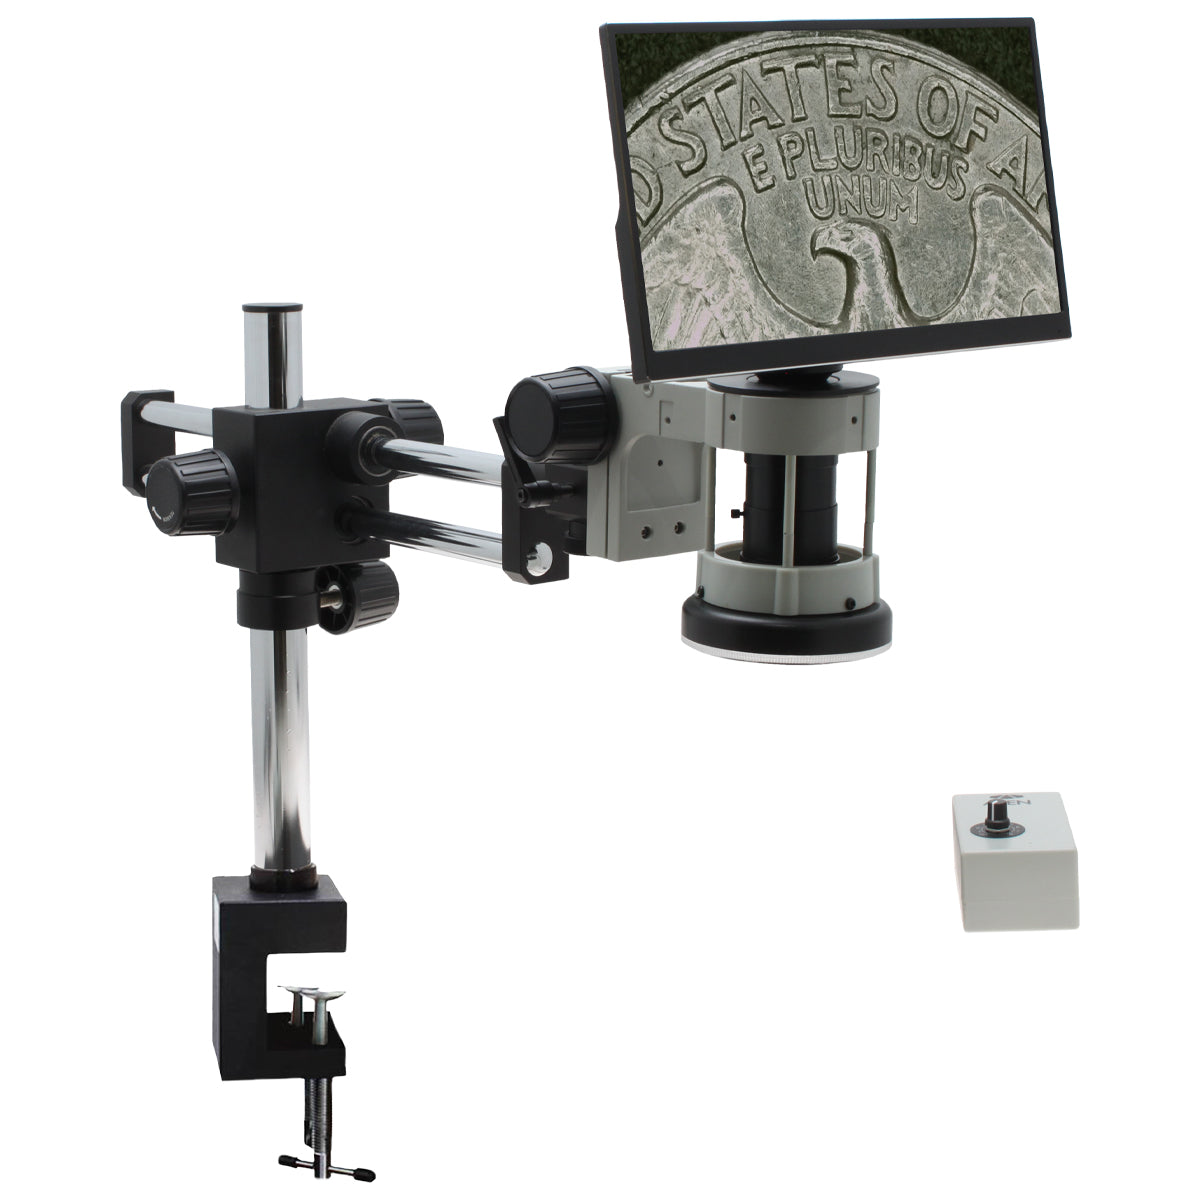 Digital Microscope Mighty Cam Eidos [7x-70x] on DABS Stand with Table Clamp